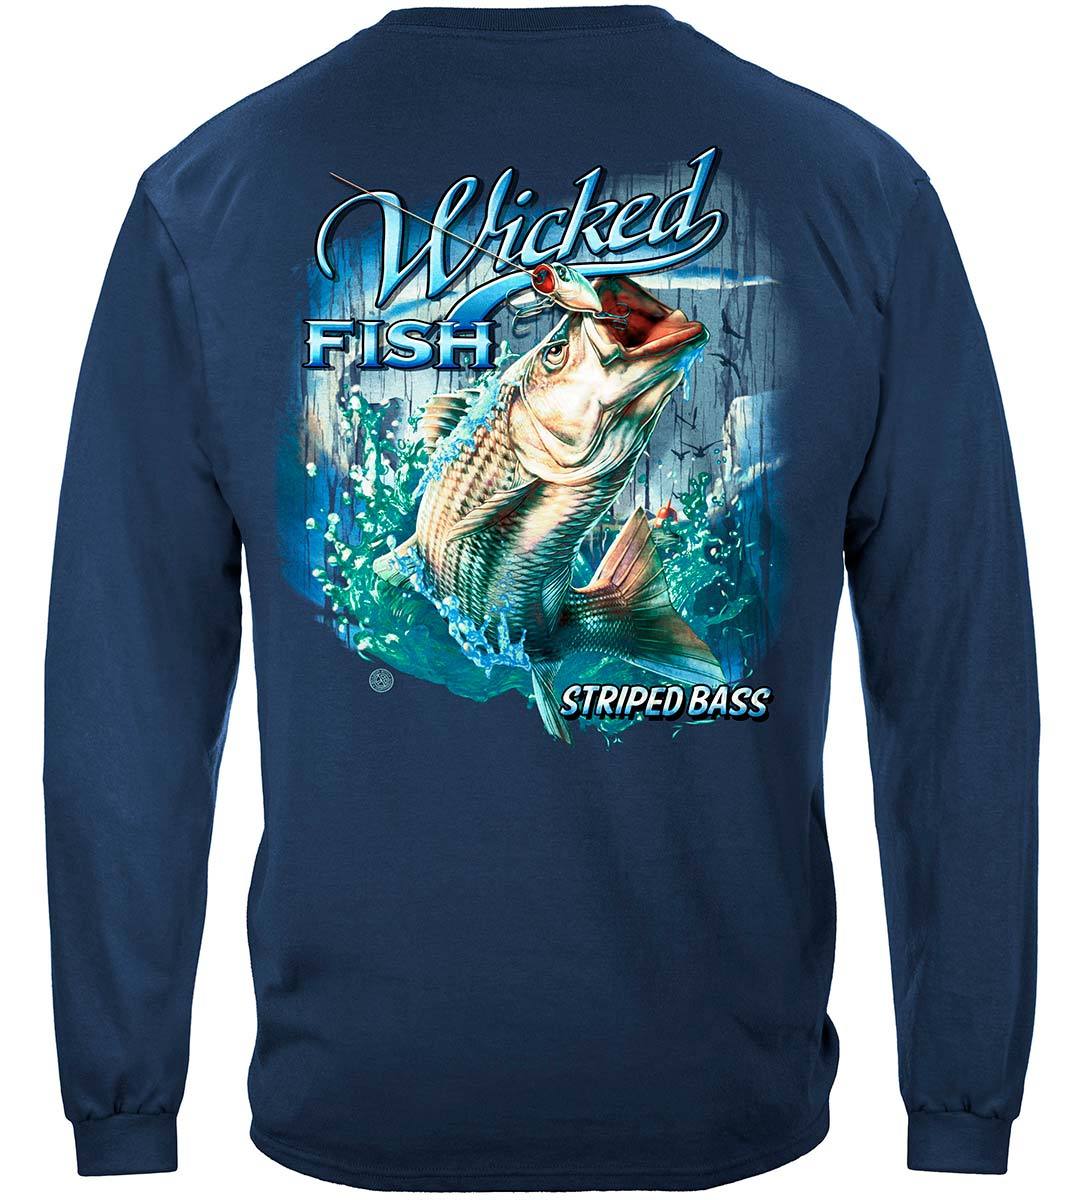 Wicked Fish Striped Bass with Popper Air Born Premium T-Shirt, Long Sleeve / Large